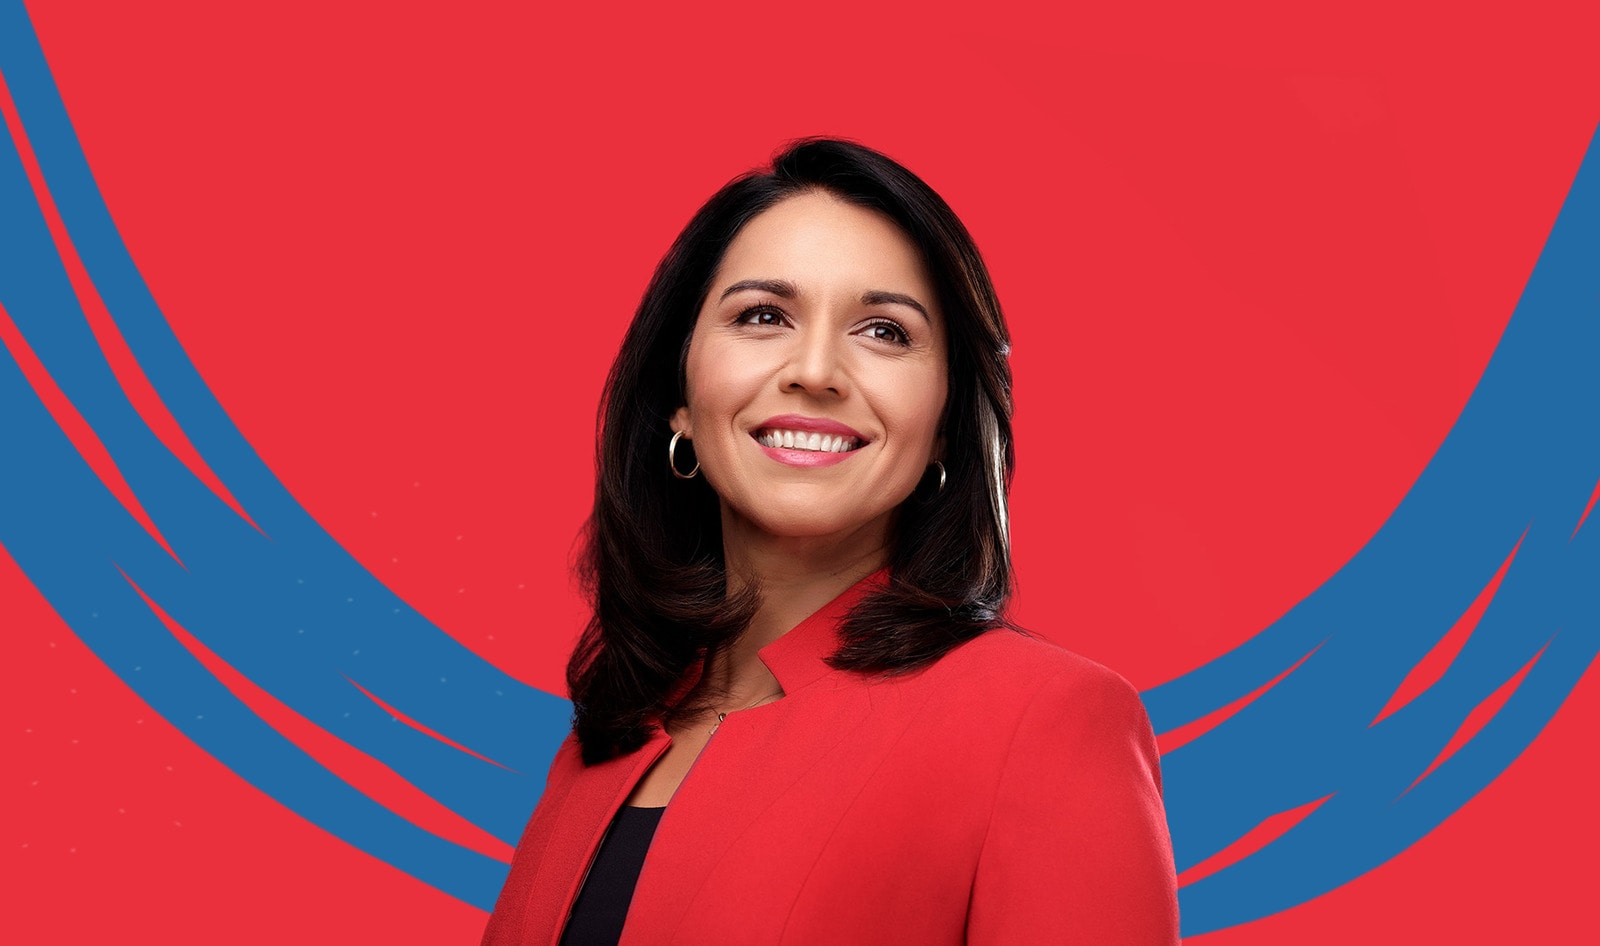 Tulsi Gabbard on Veganism, Climate Change, and What Gives Her Hope